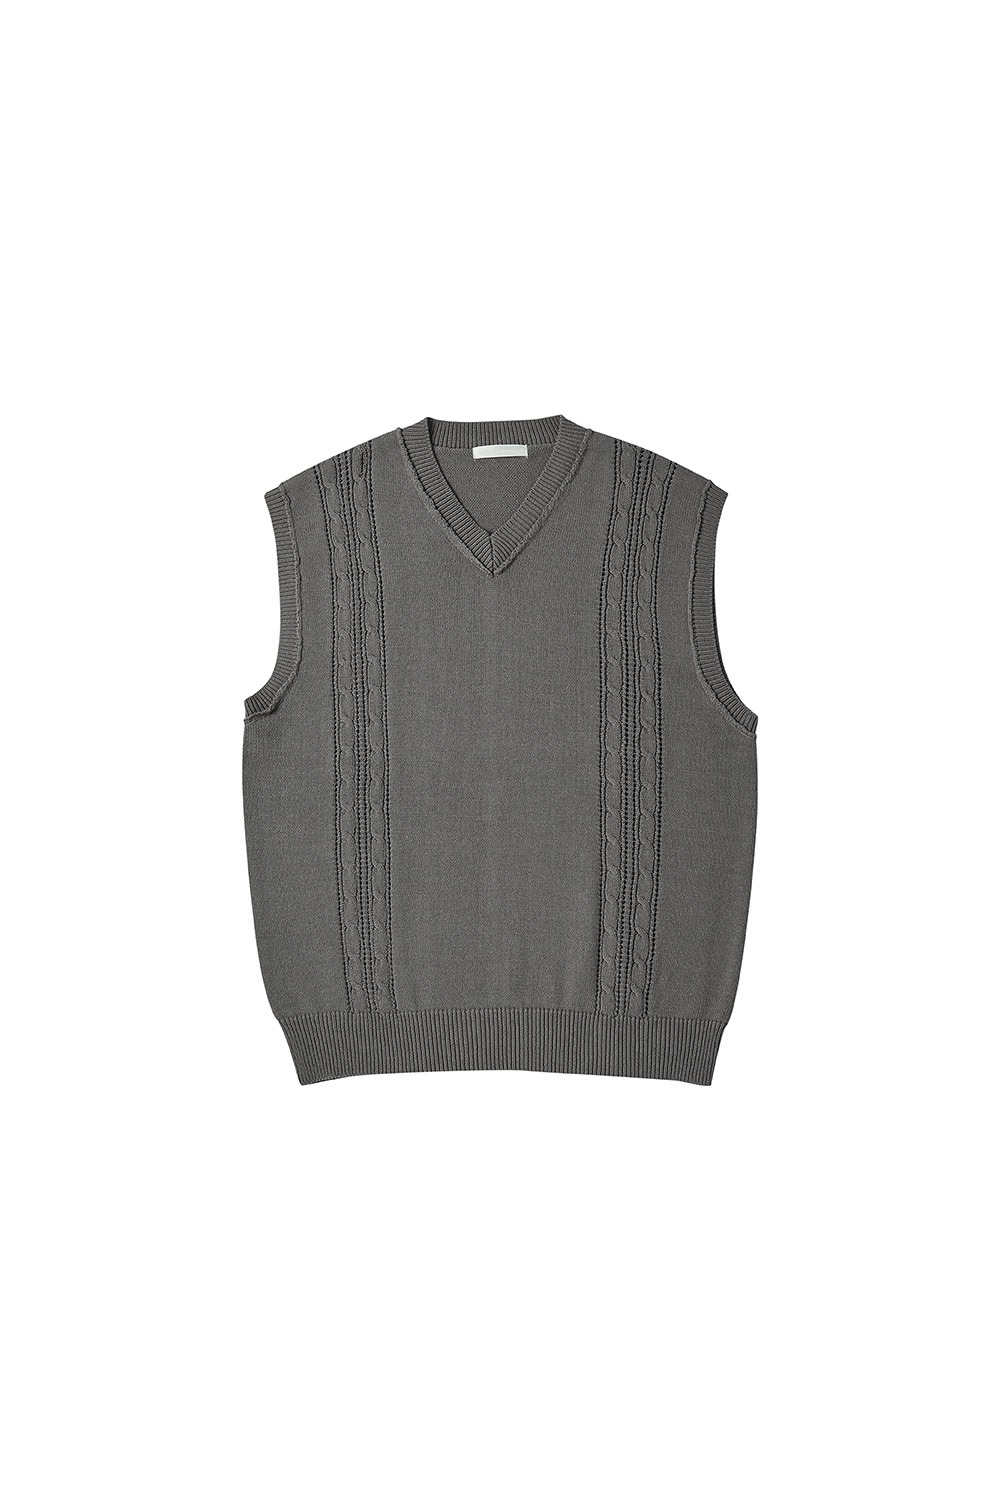 Reversed Seam Cable Vest_Charcoal Grey